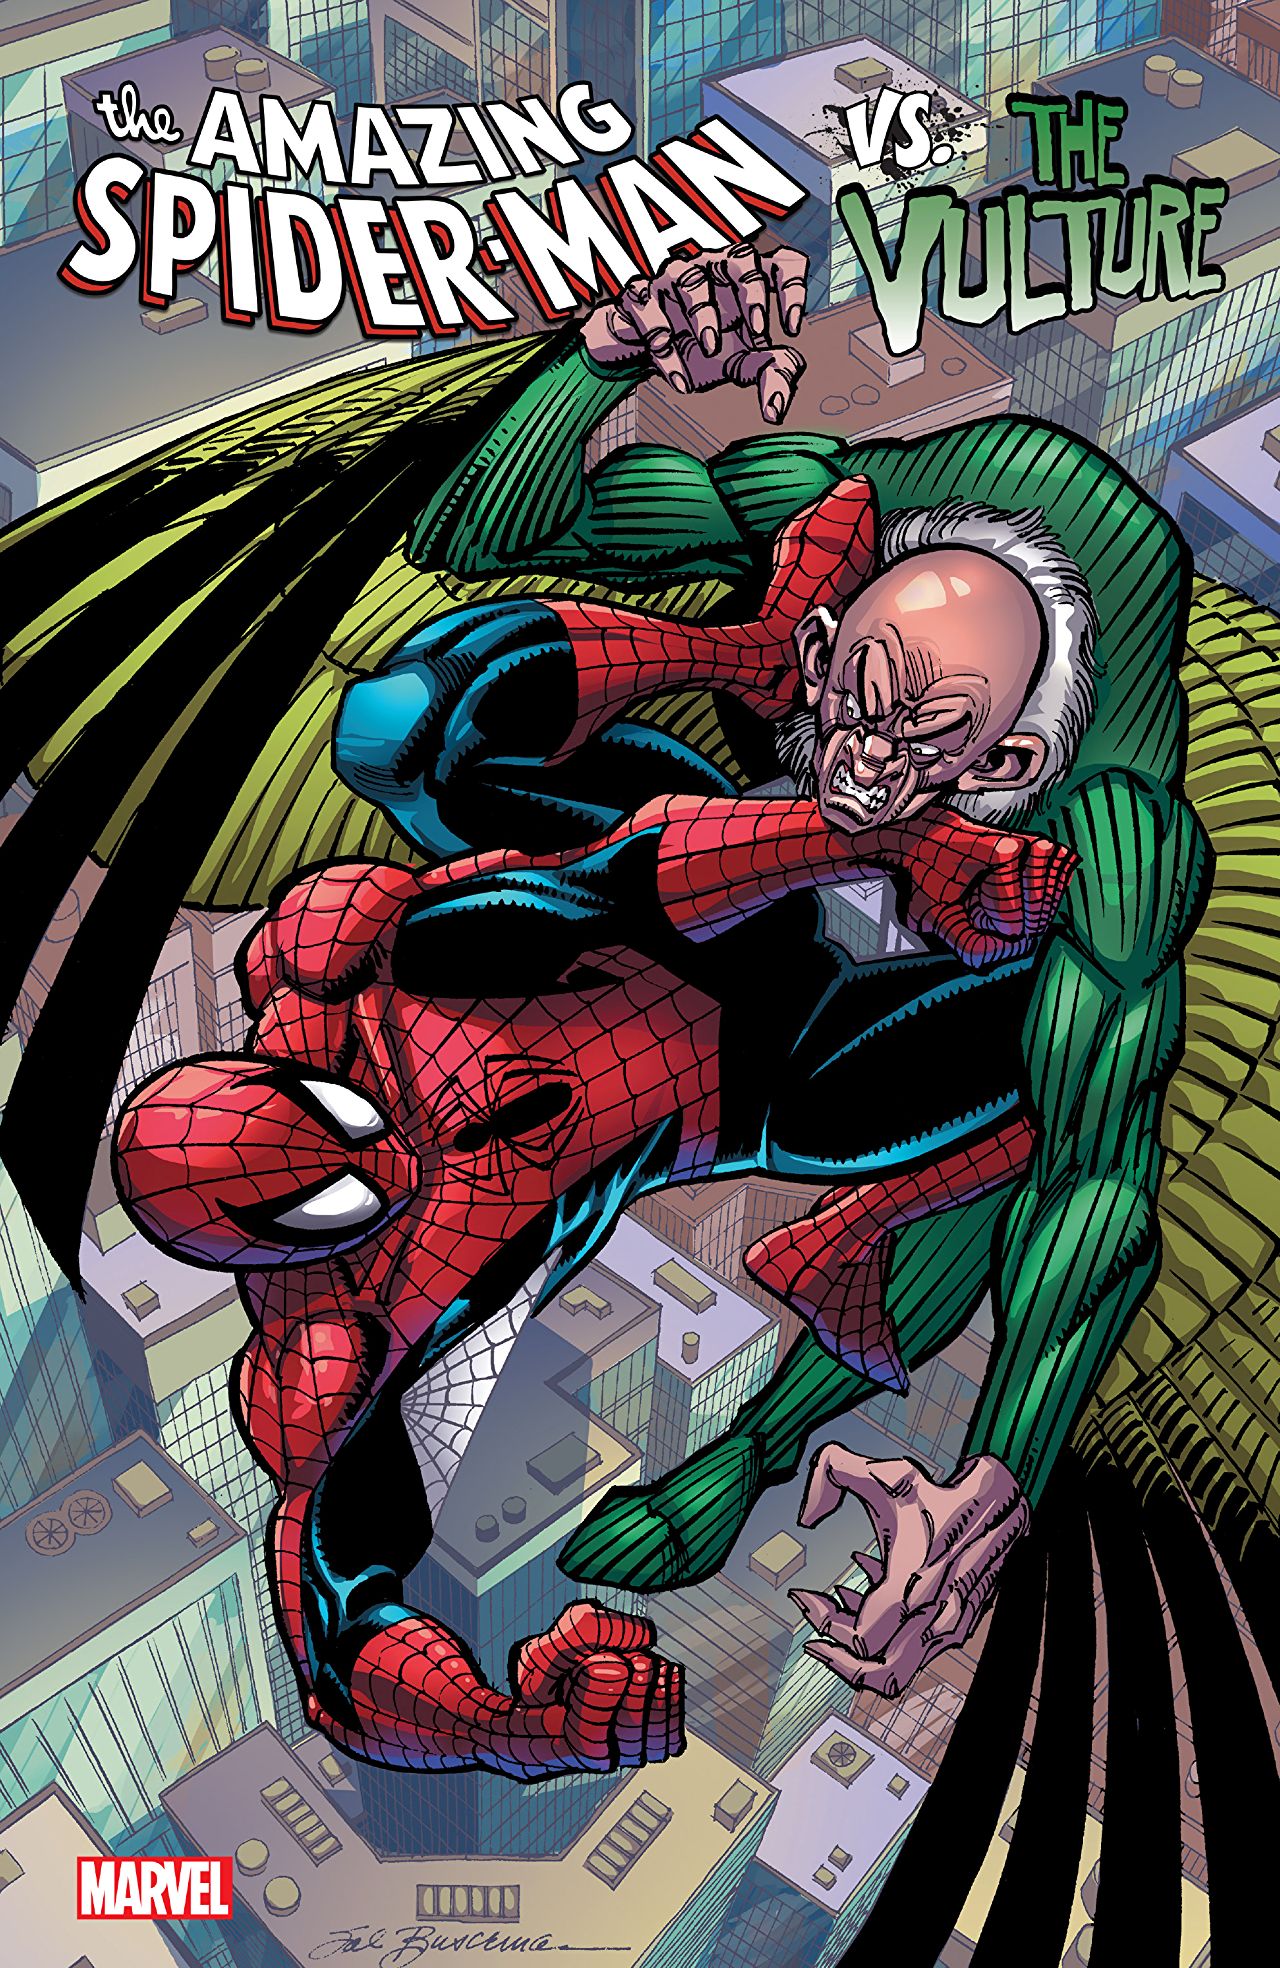 The Amazing Spider-Man vs. The Vulture Review